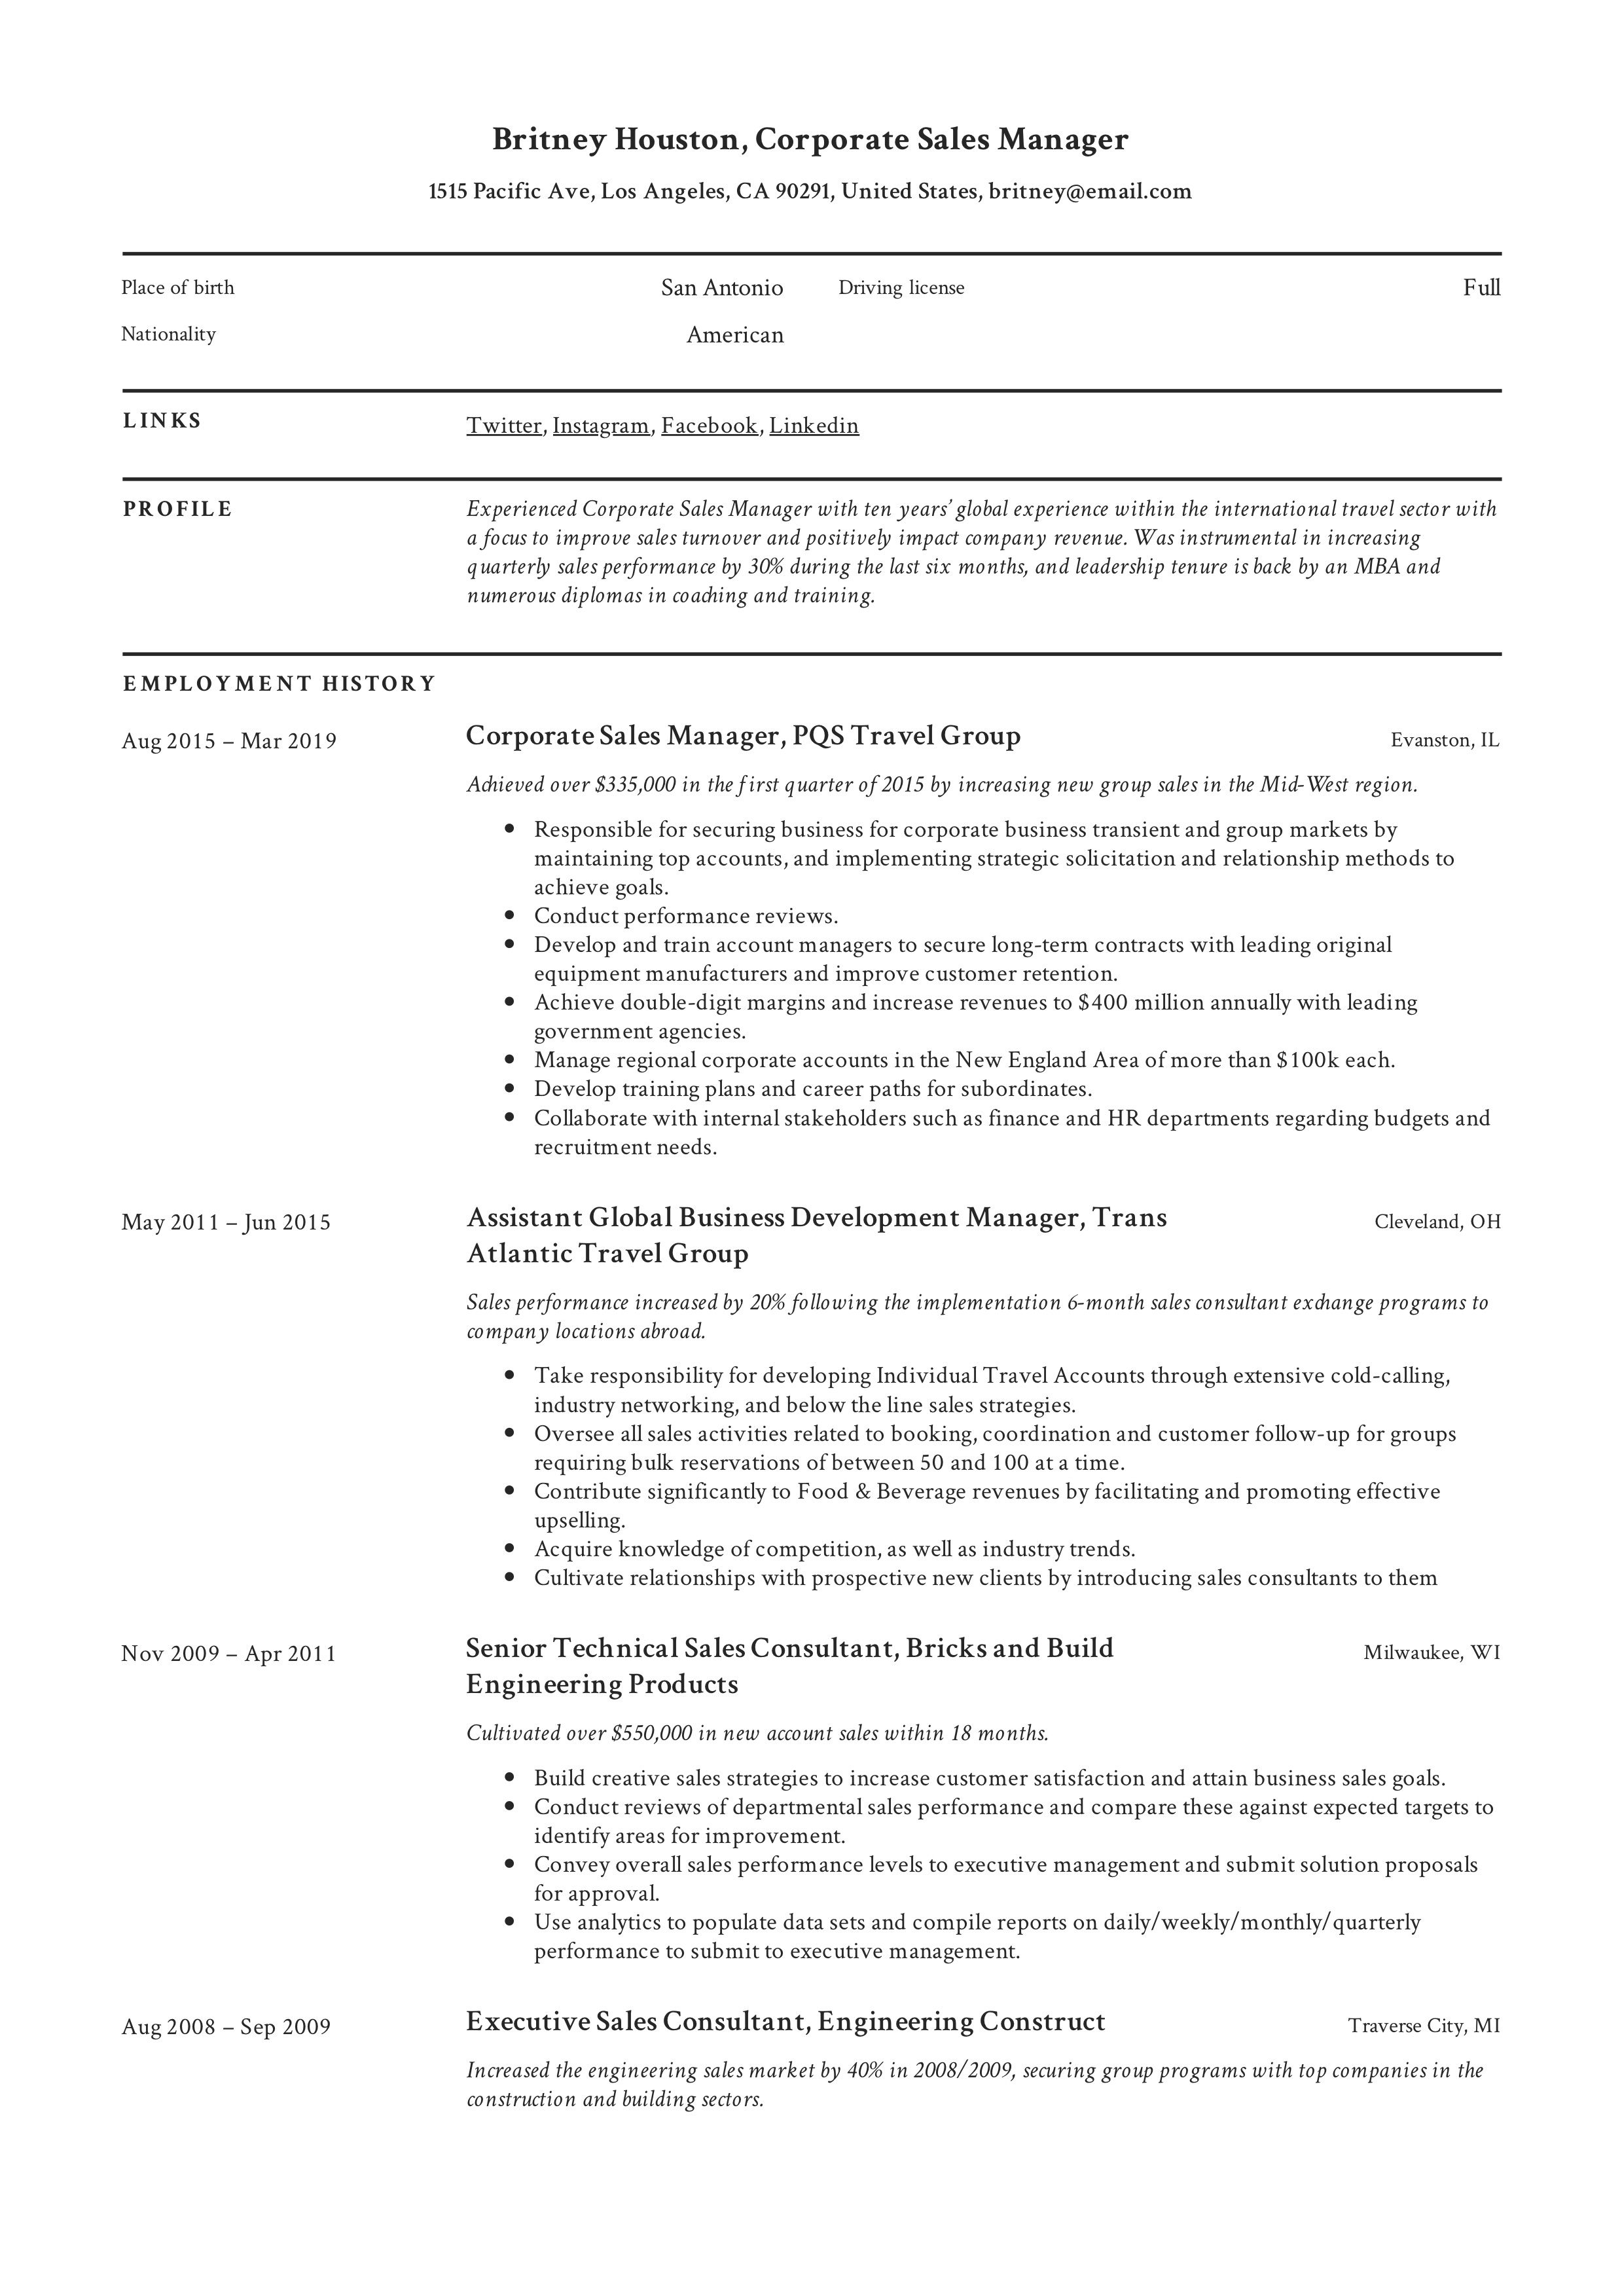 Corporate Sales Manager Professional Resume